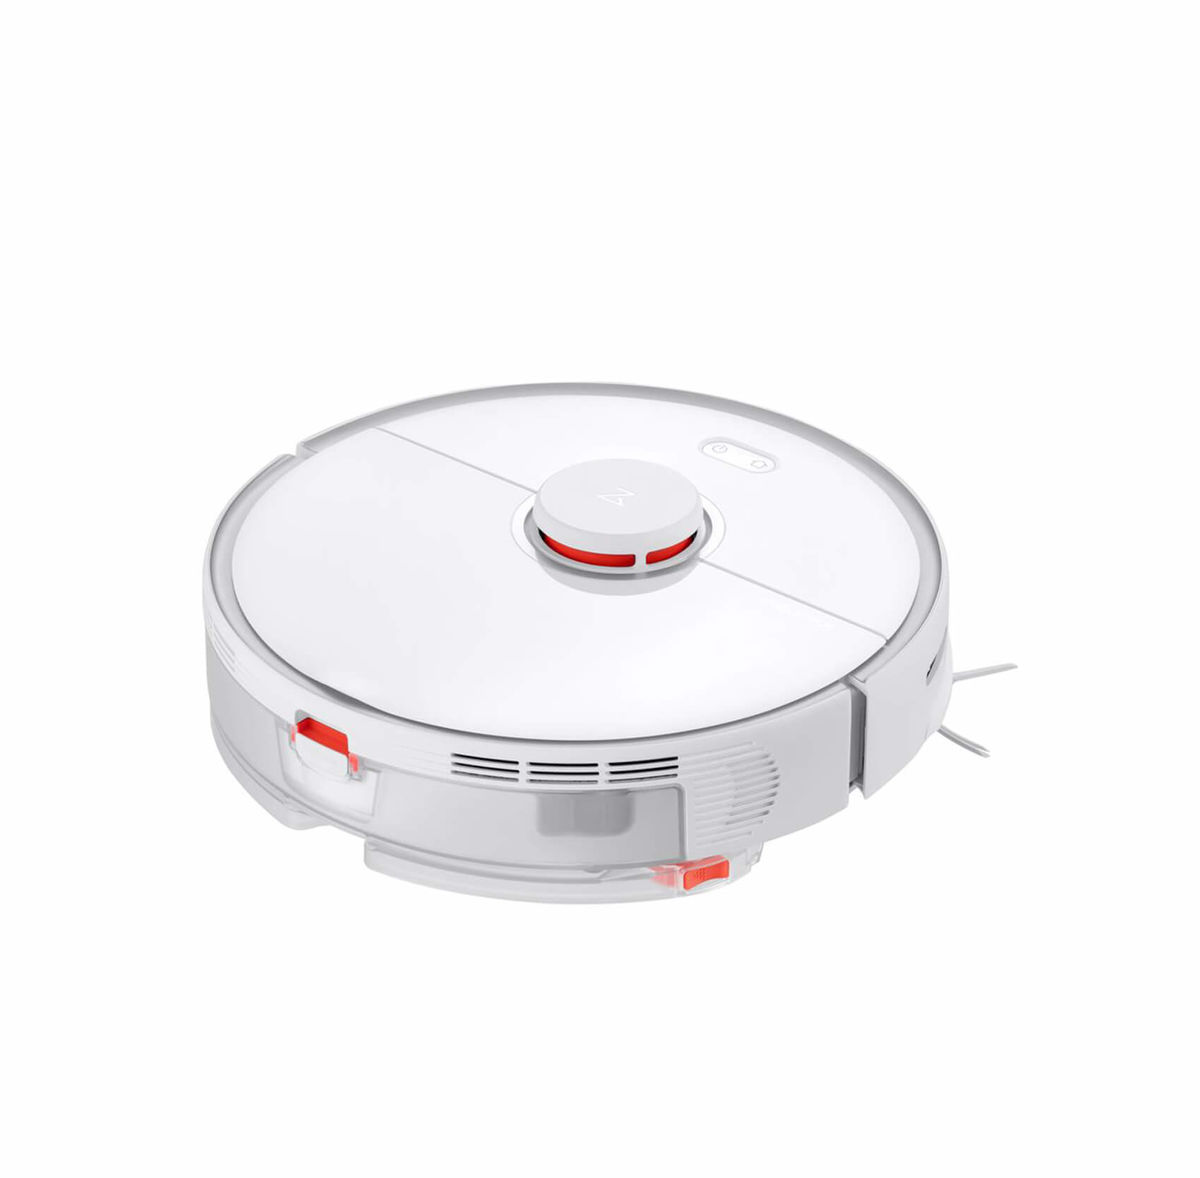 Image of Roborock S5 MAX Saugroboter weiss bei nettoshop.ch